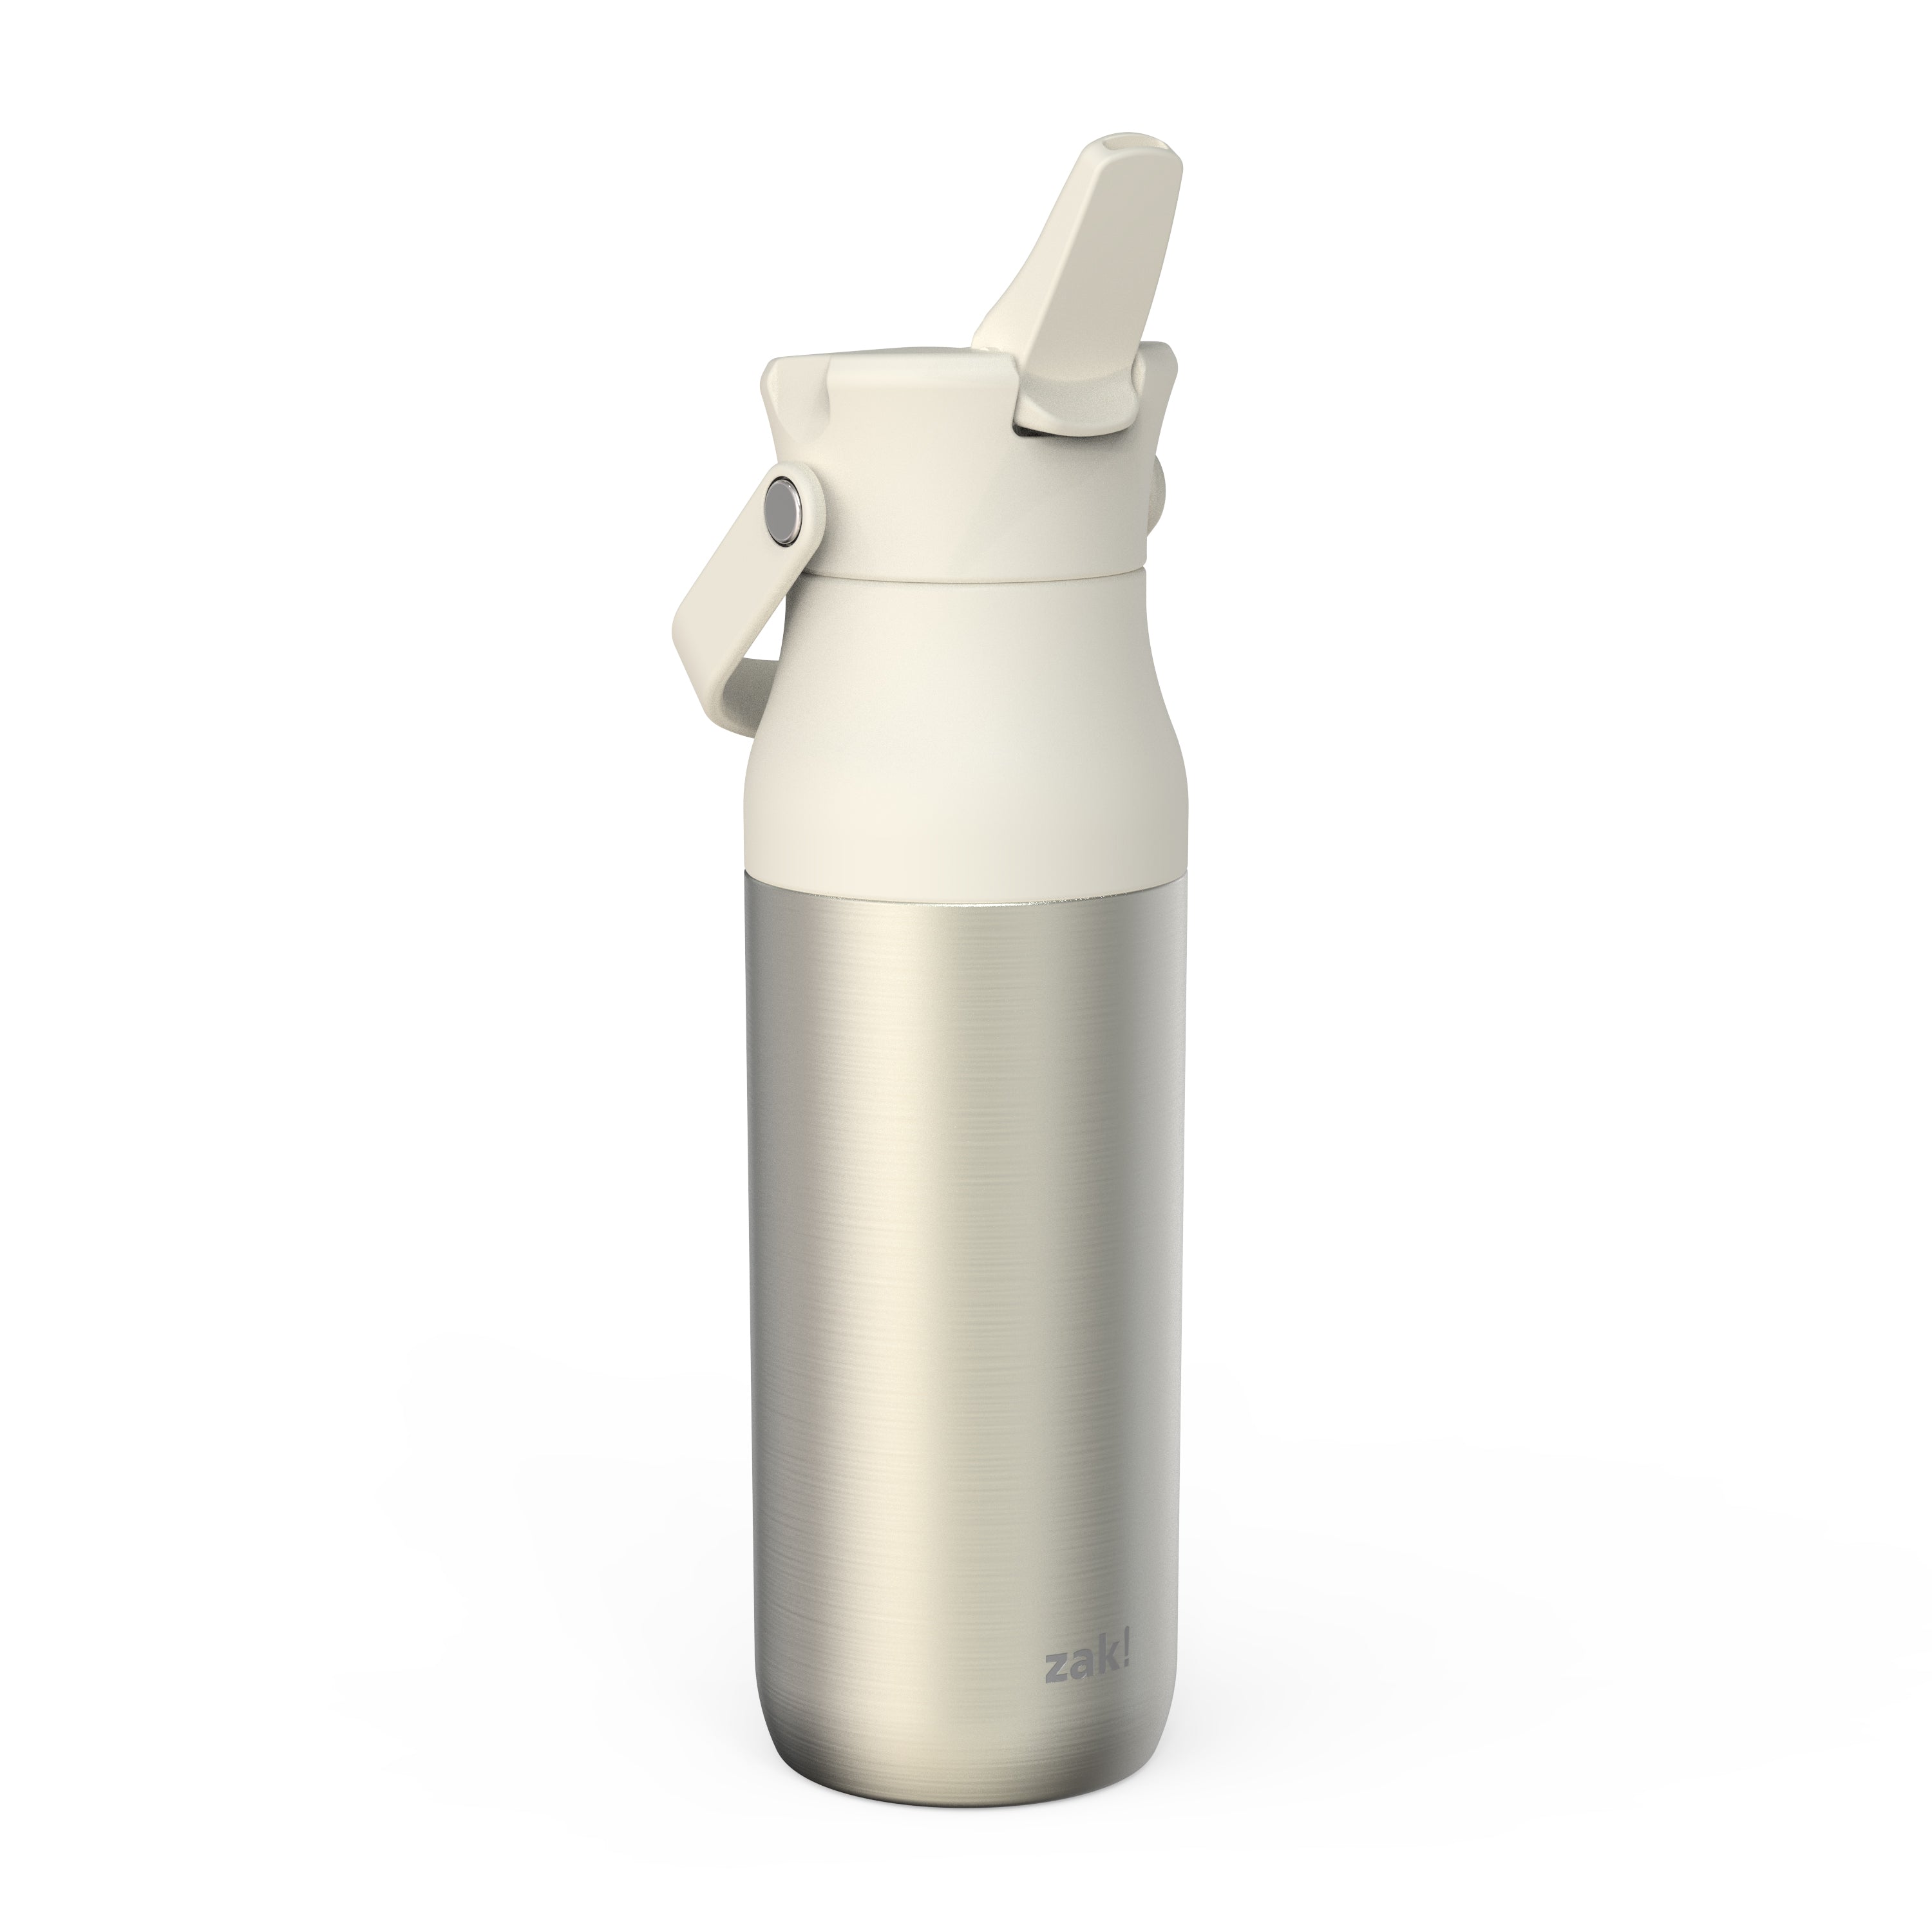 32 oz Insulated Water Bottles - with Straw & Flip Auto Lid, Stainless Steel Water  Bottle Shoulder